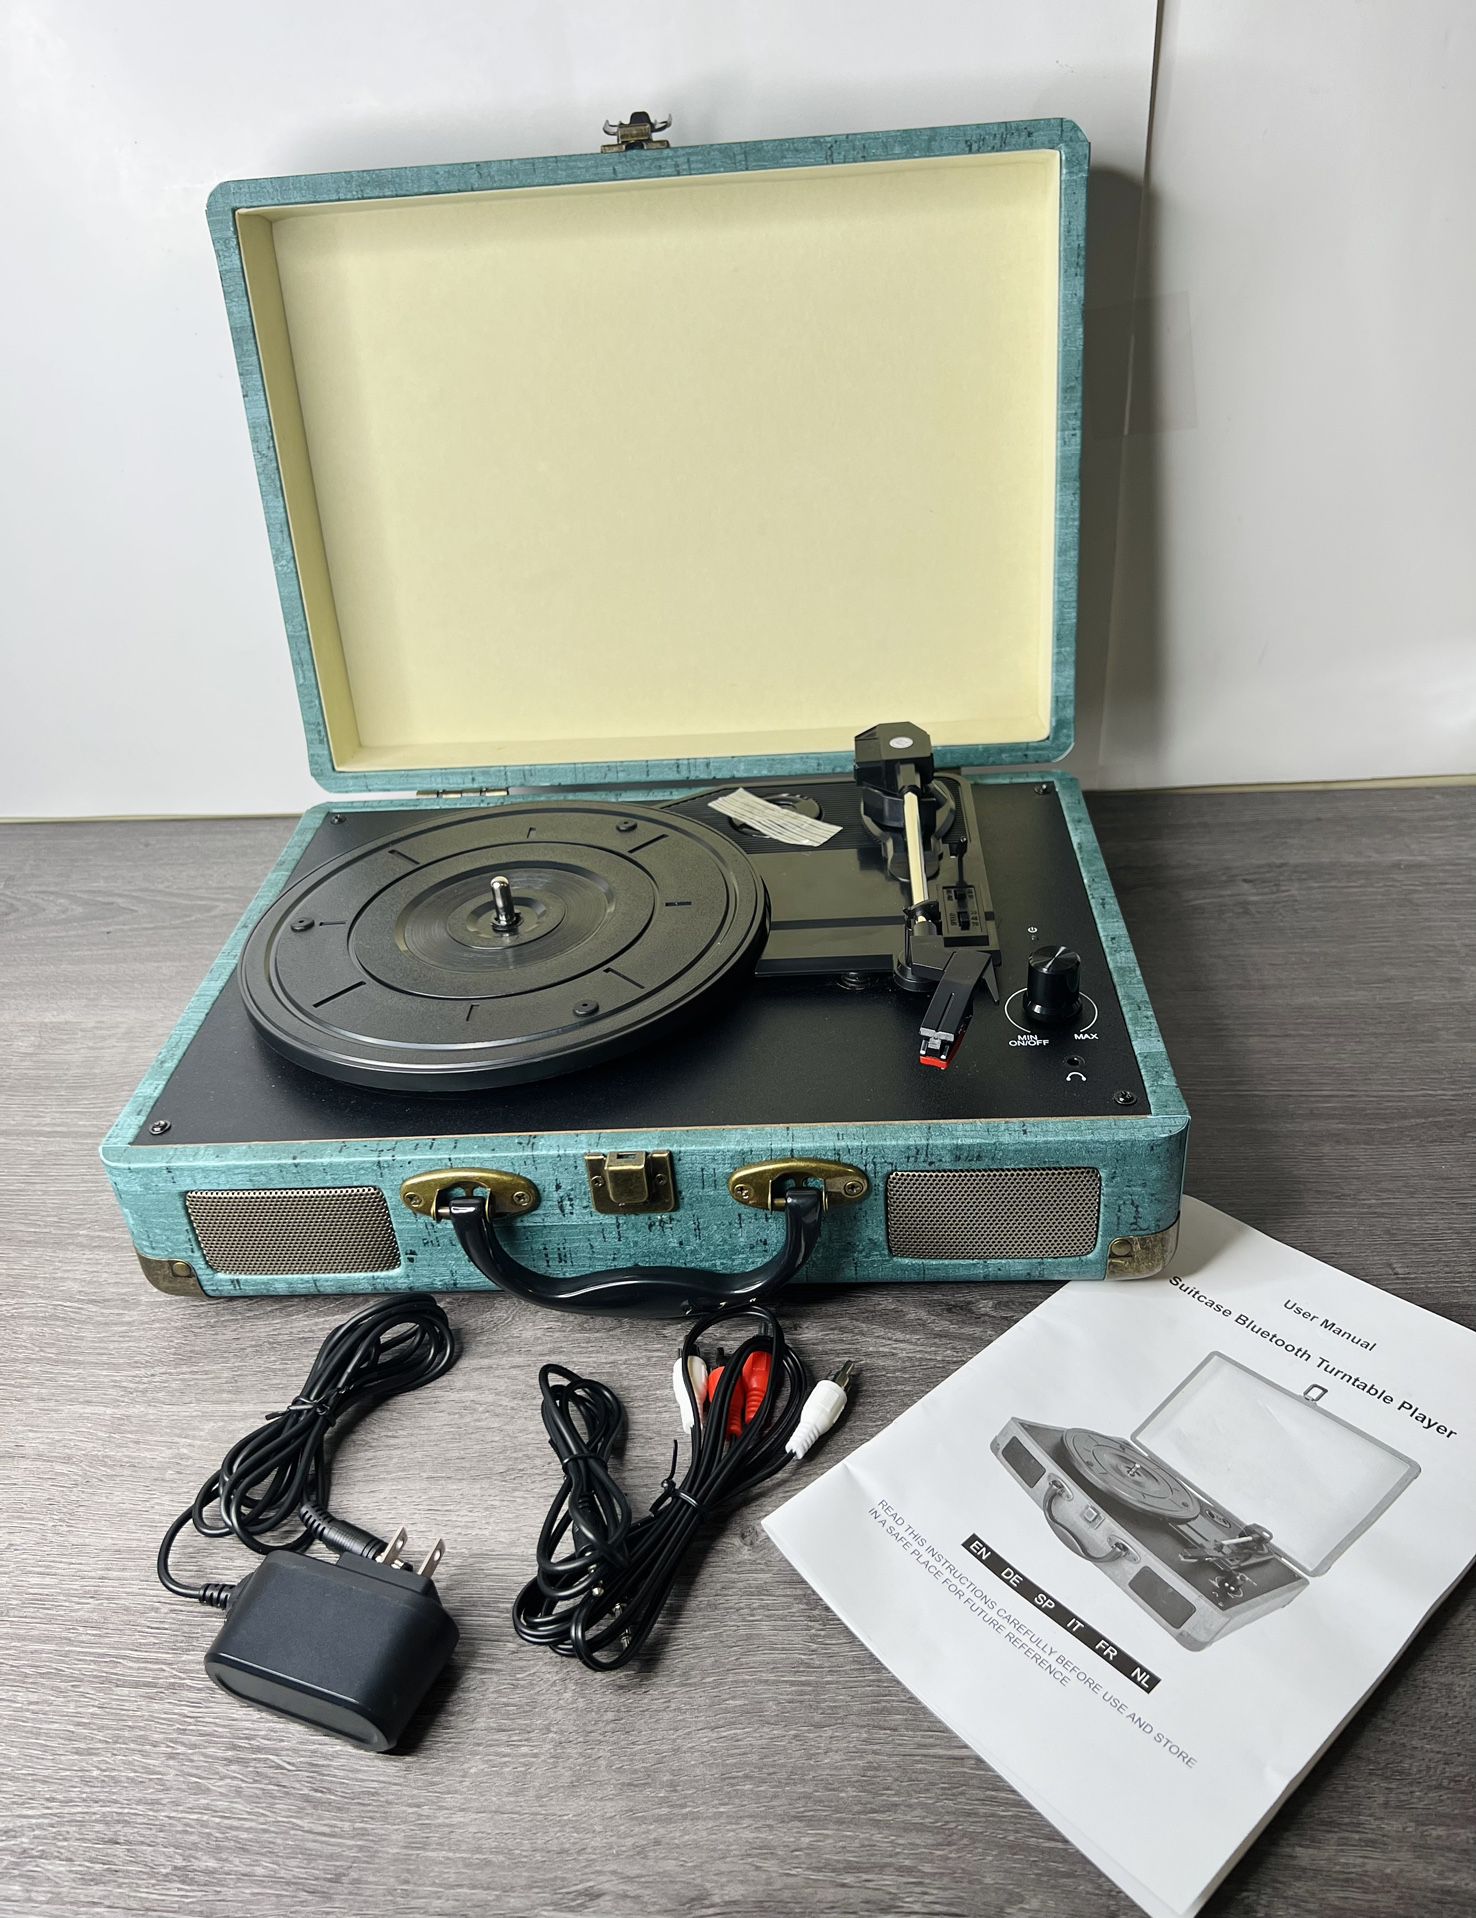 Record Player Vintage 3-Speed Bluetooth Vinyl Turntable with Stereo Speaker